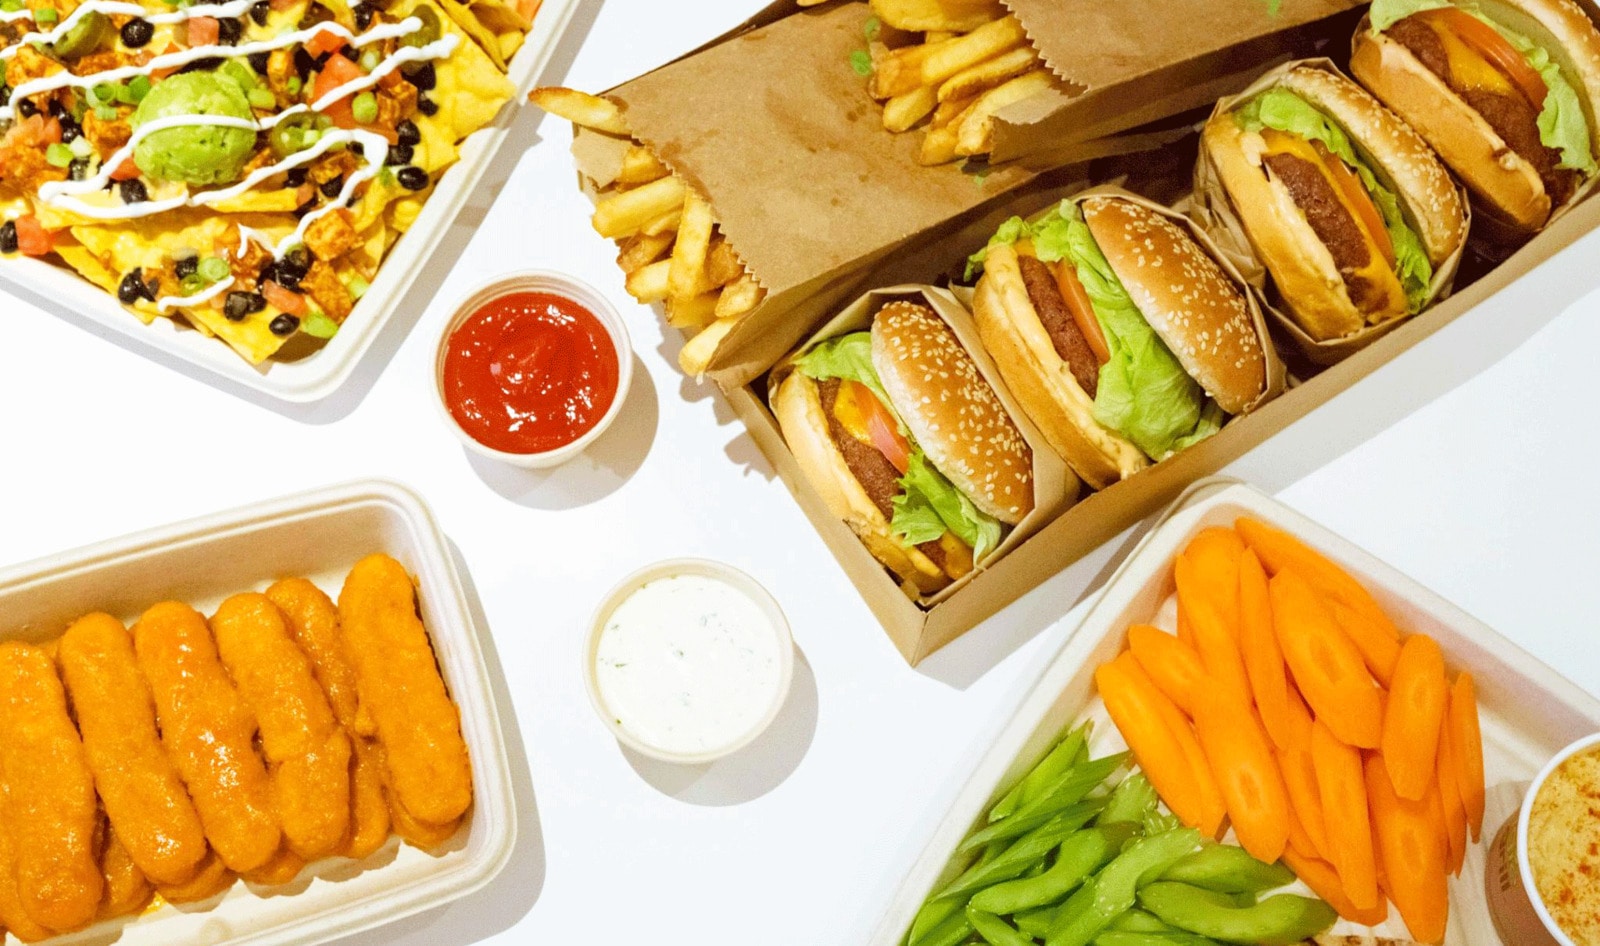 Vegan Chain Veggie Grill to Expand to 50 Locations by 2020